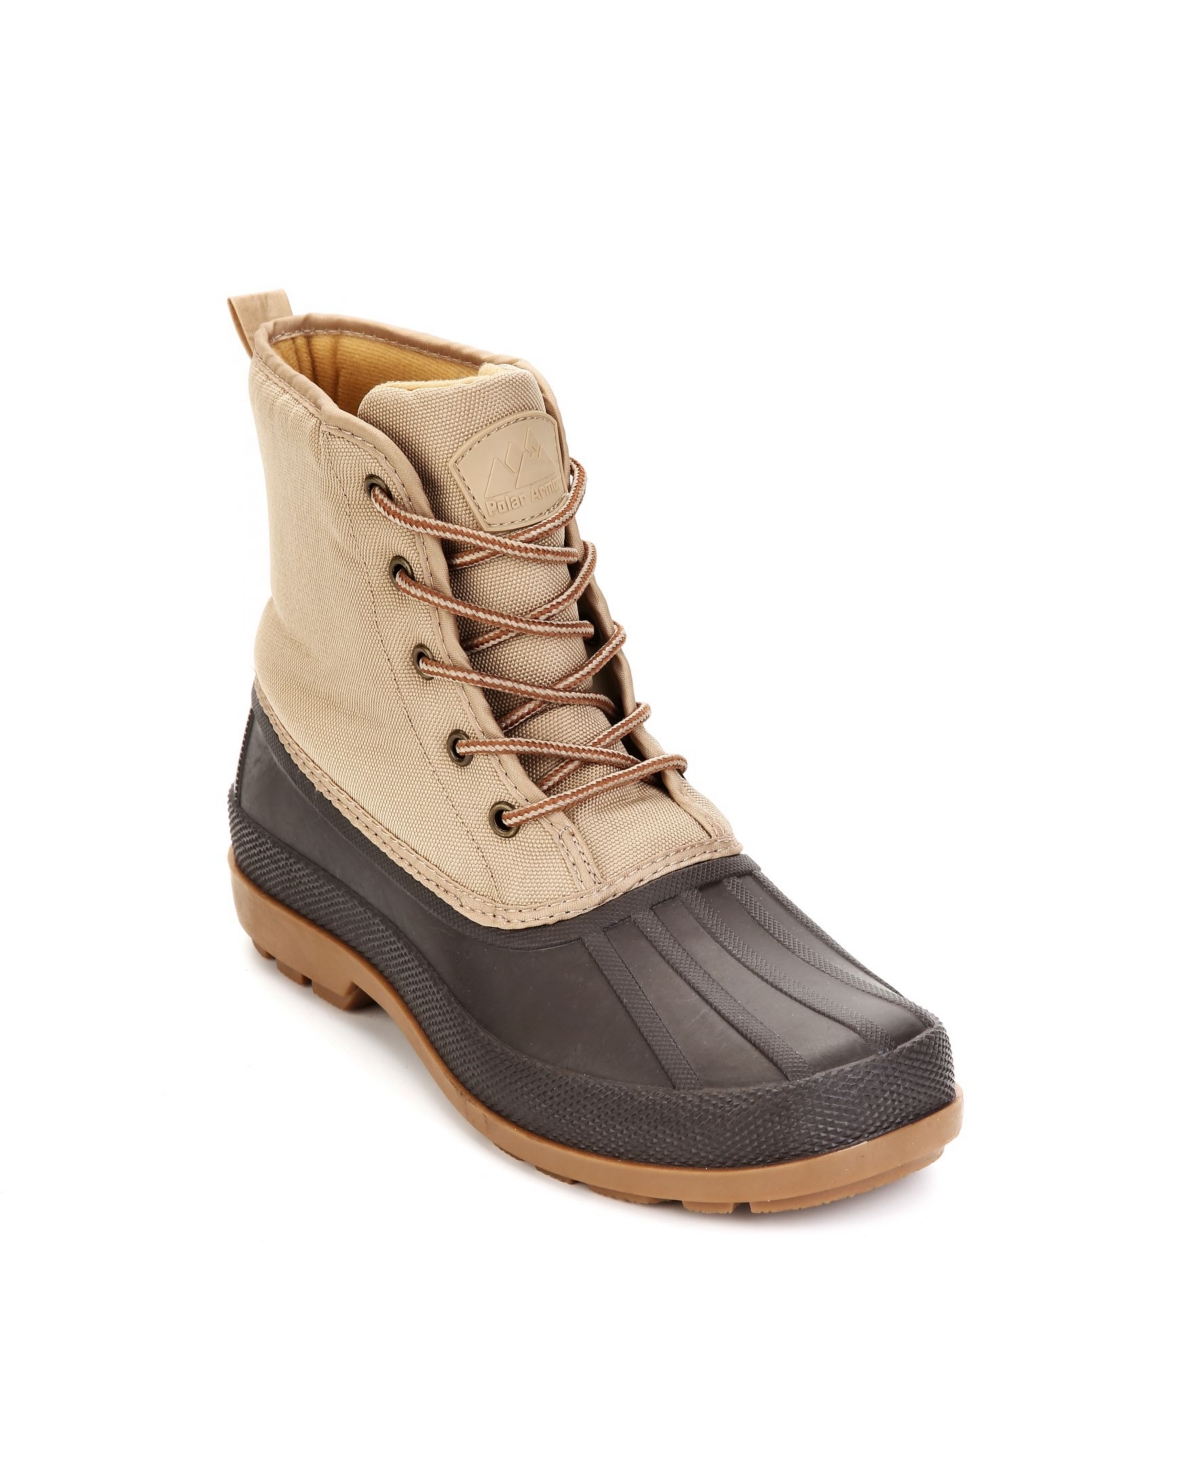 Men's All-Weather Canvas Duck-Toe Boots - Tan